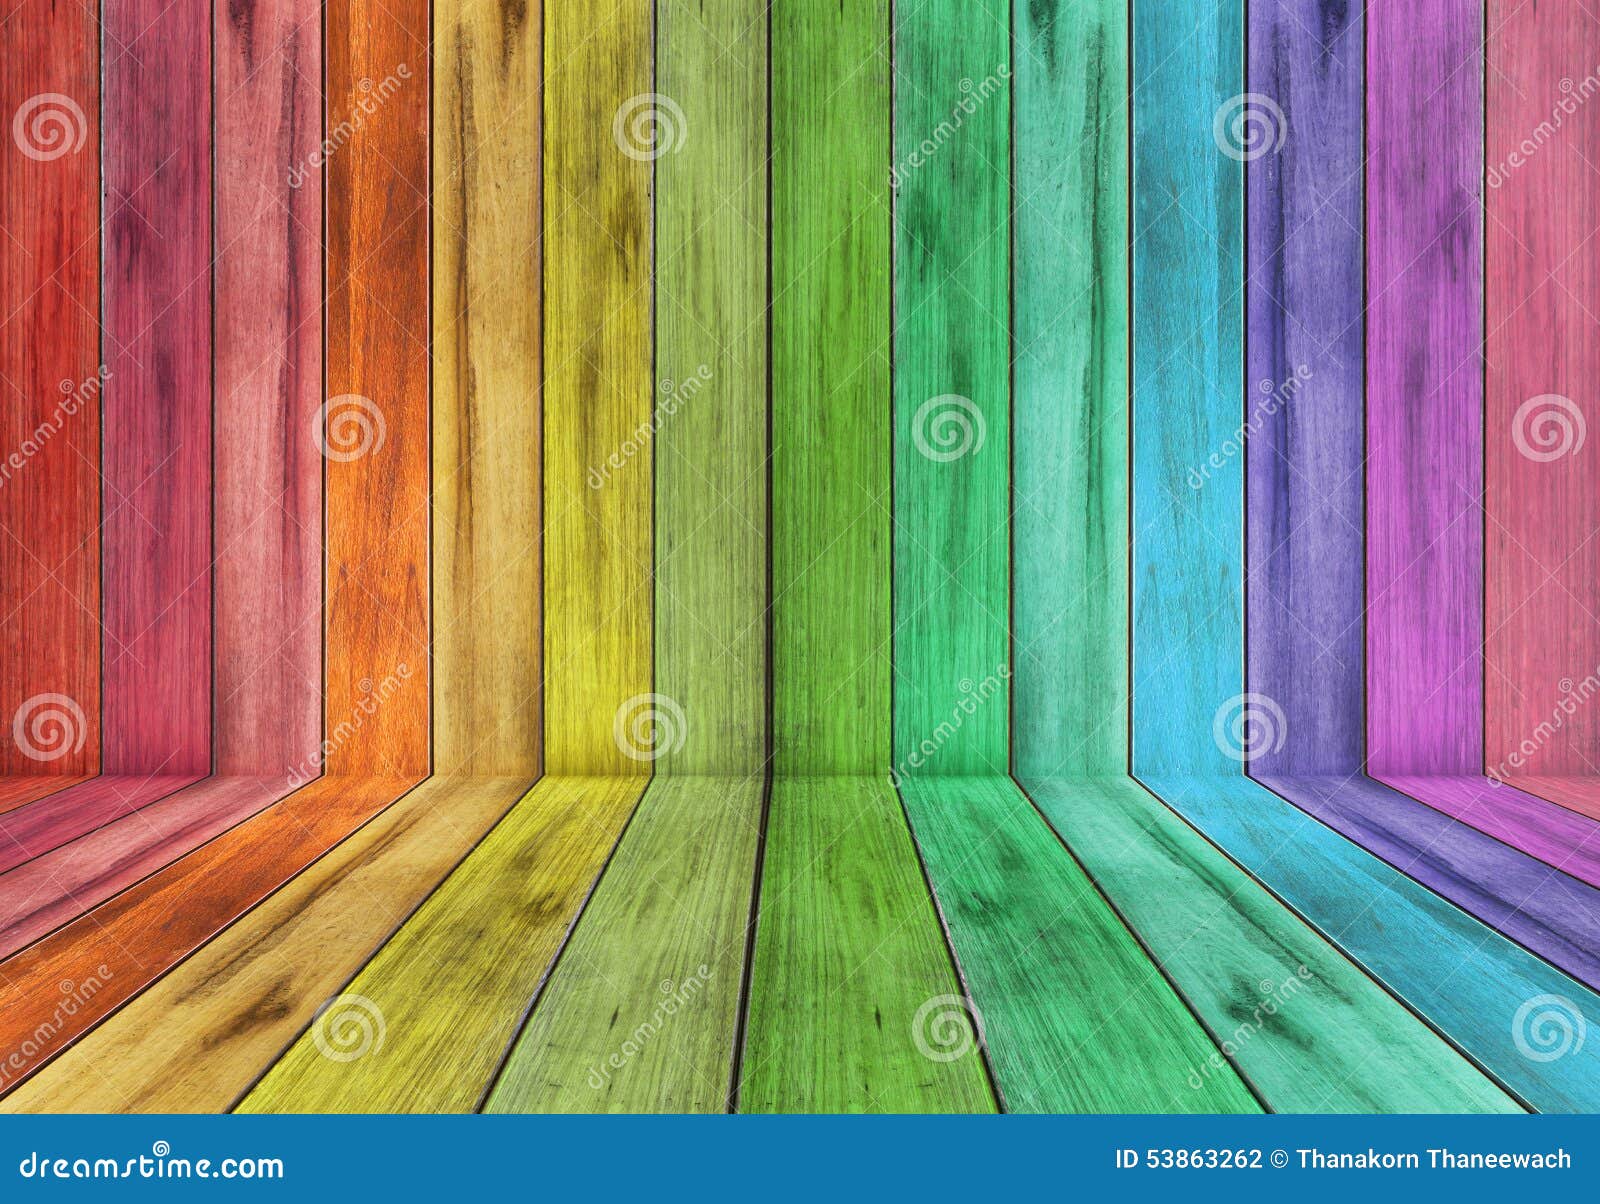 Wooden Plank With Rainbow Colour Background Stock Photo 53863262 - Megapixl